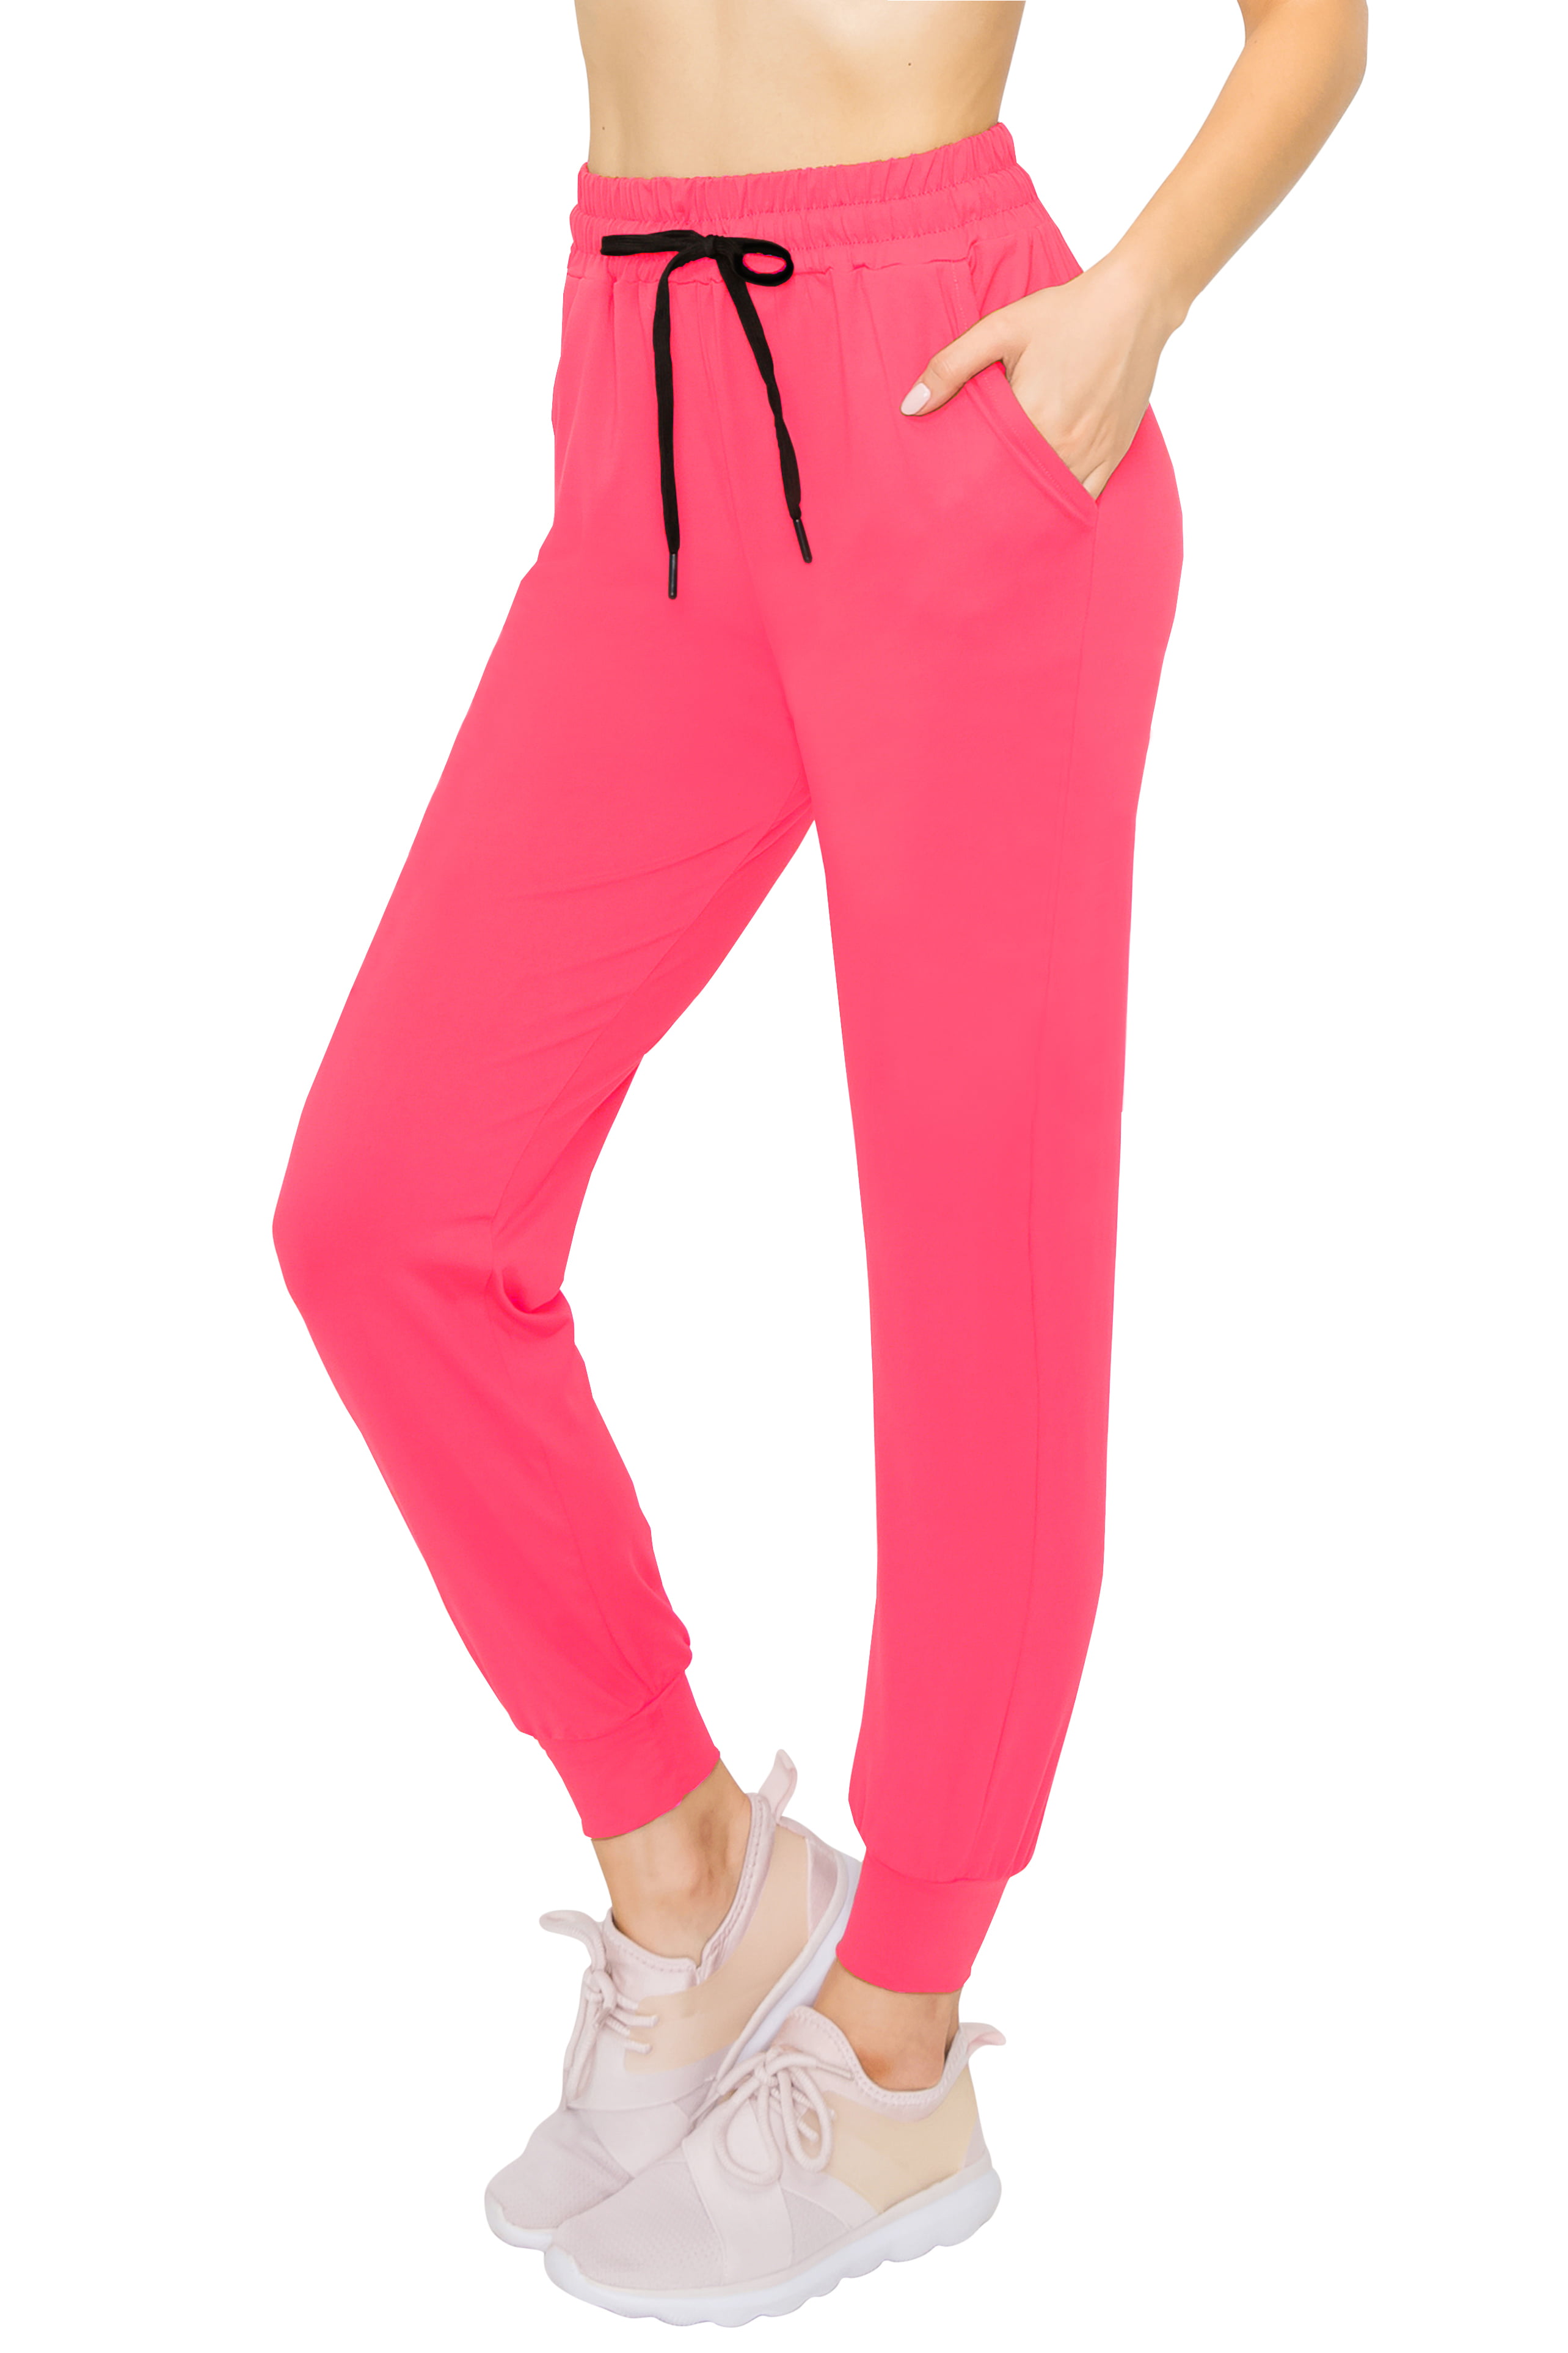 Lovely love print in pink and aqua Women's Sweatpants Joggers